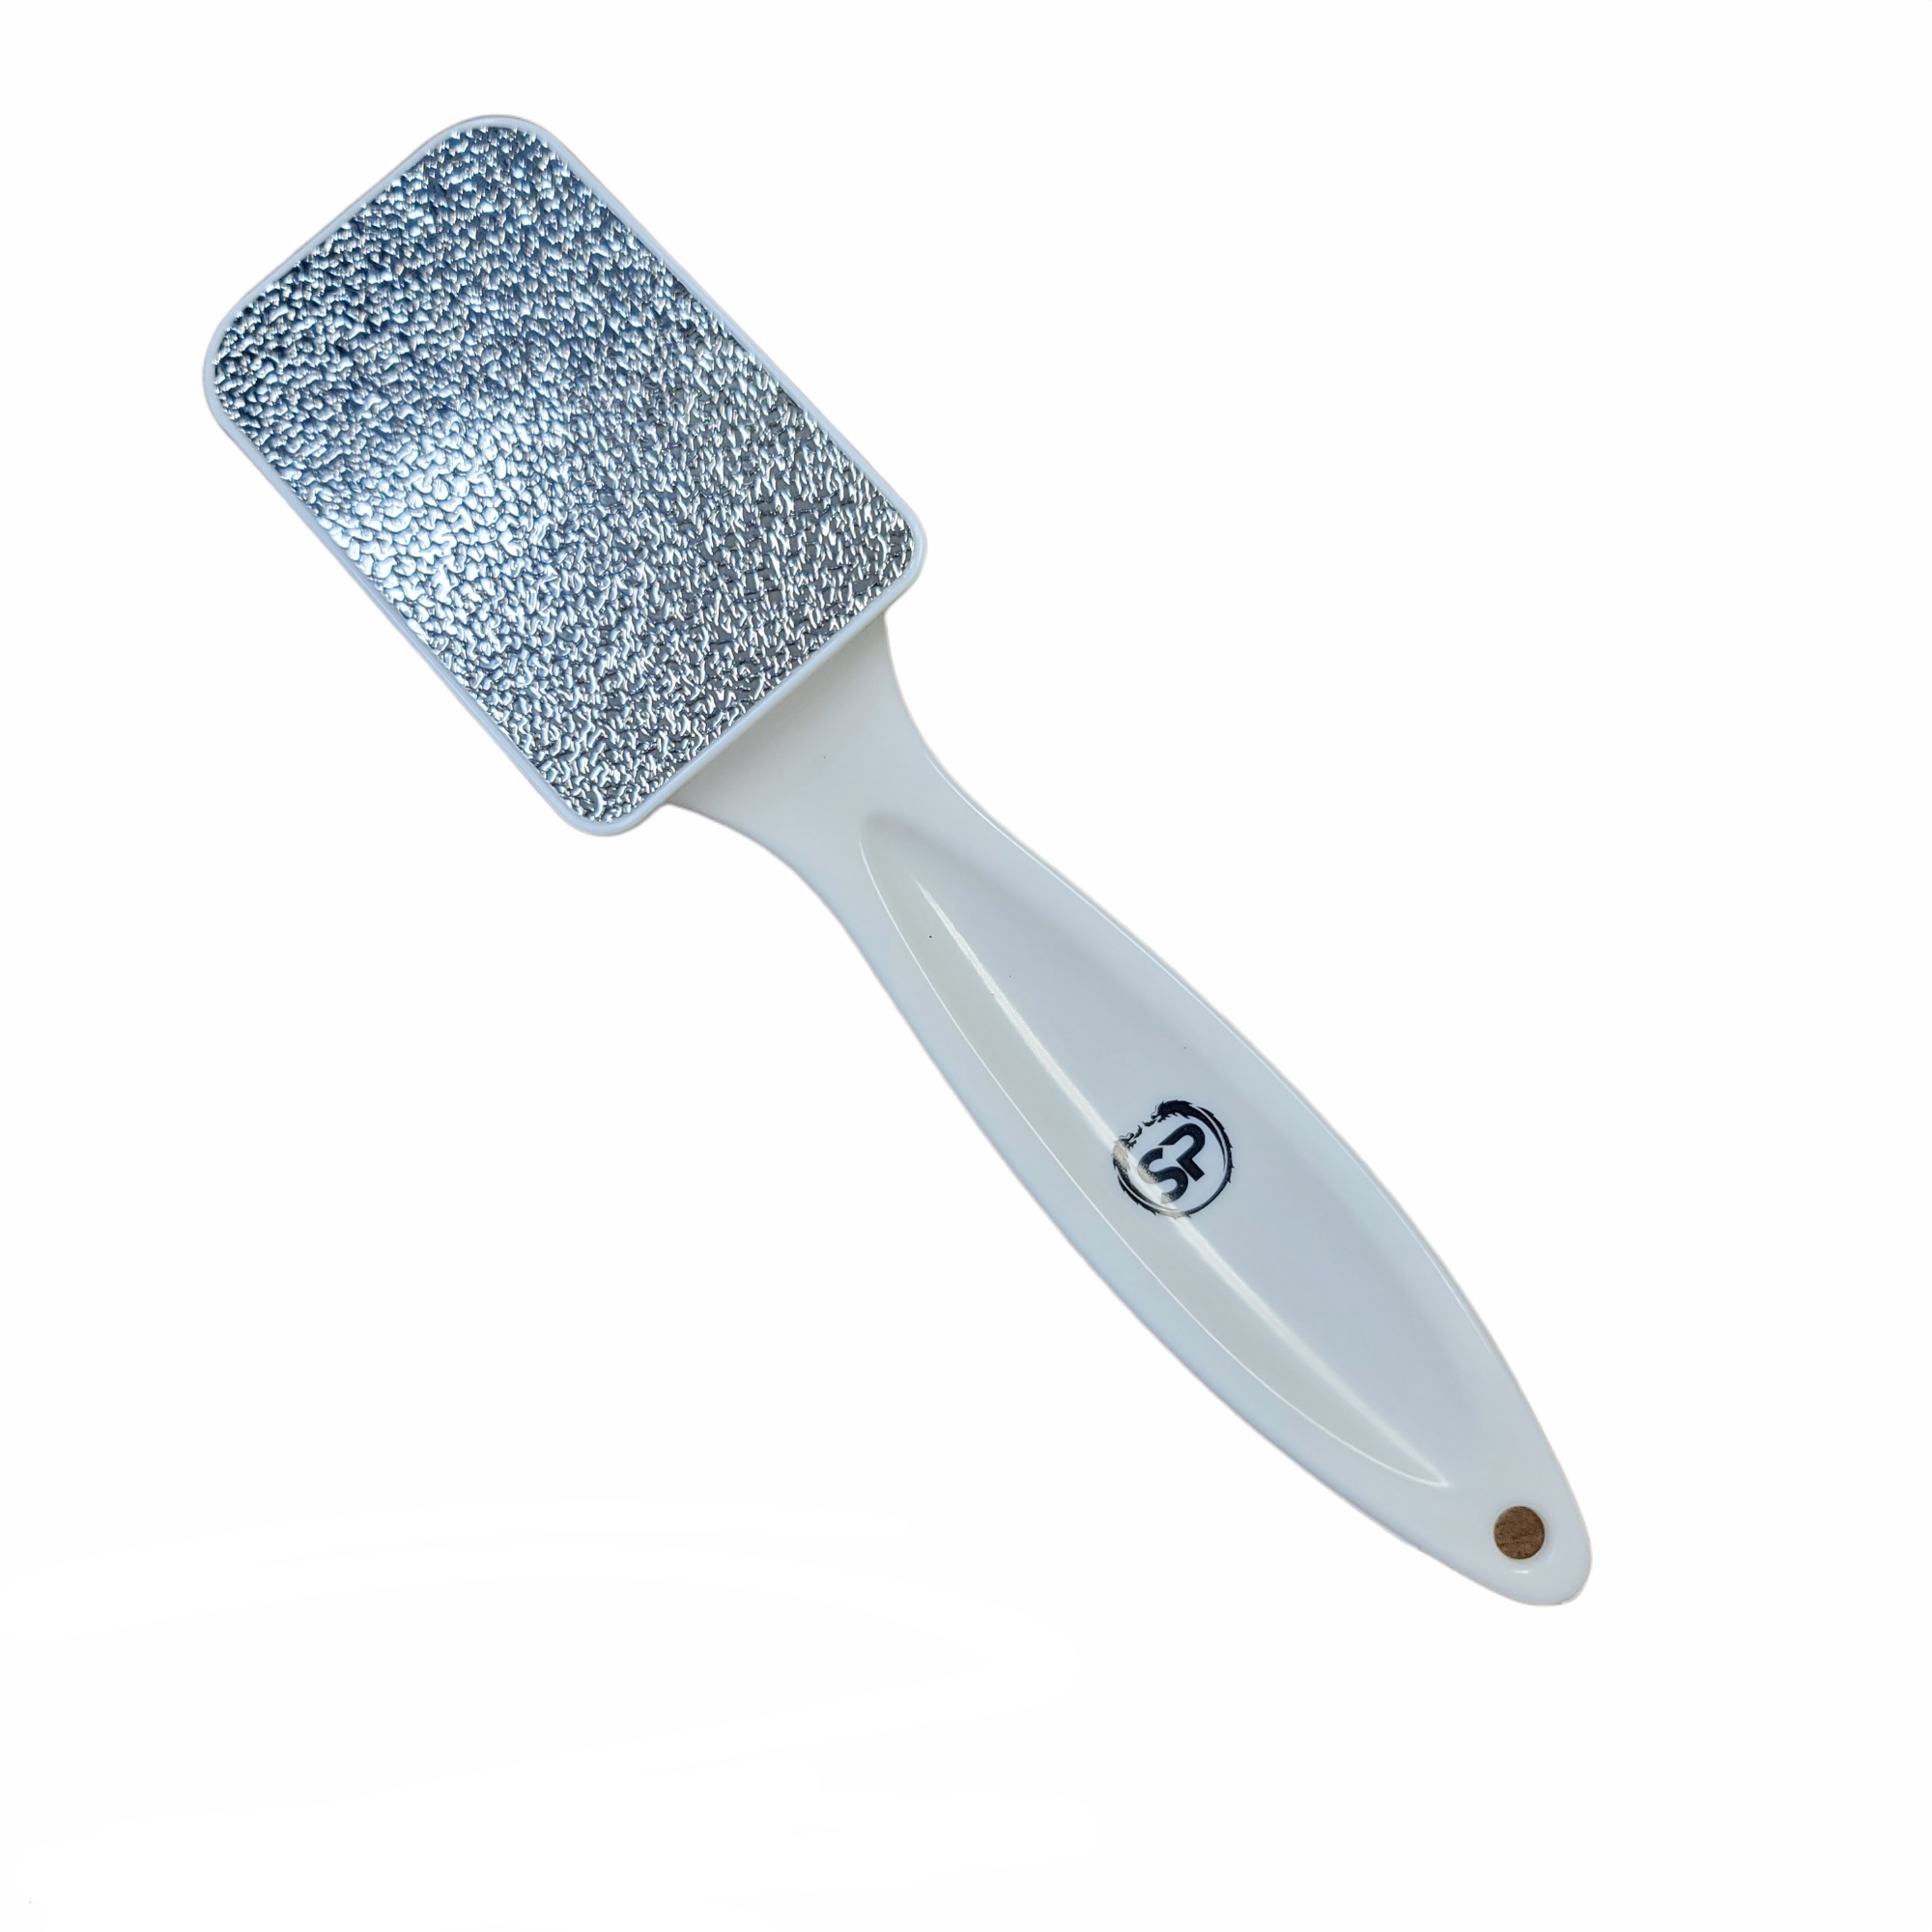 Foot File, Callus Remover, 1 Stainless Steel Foot File